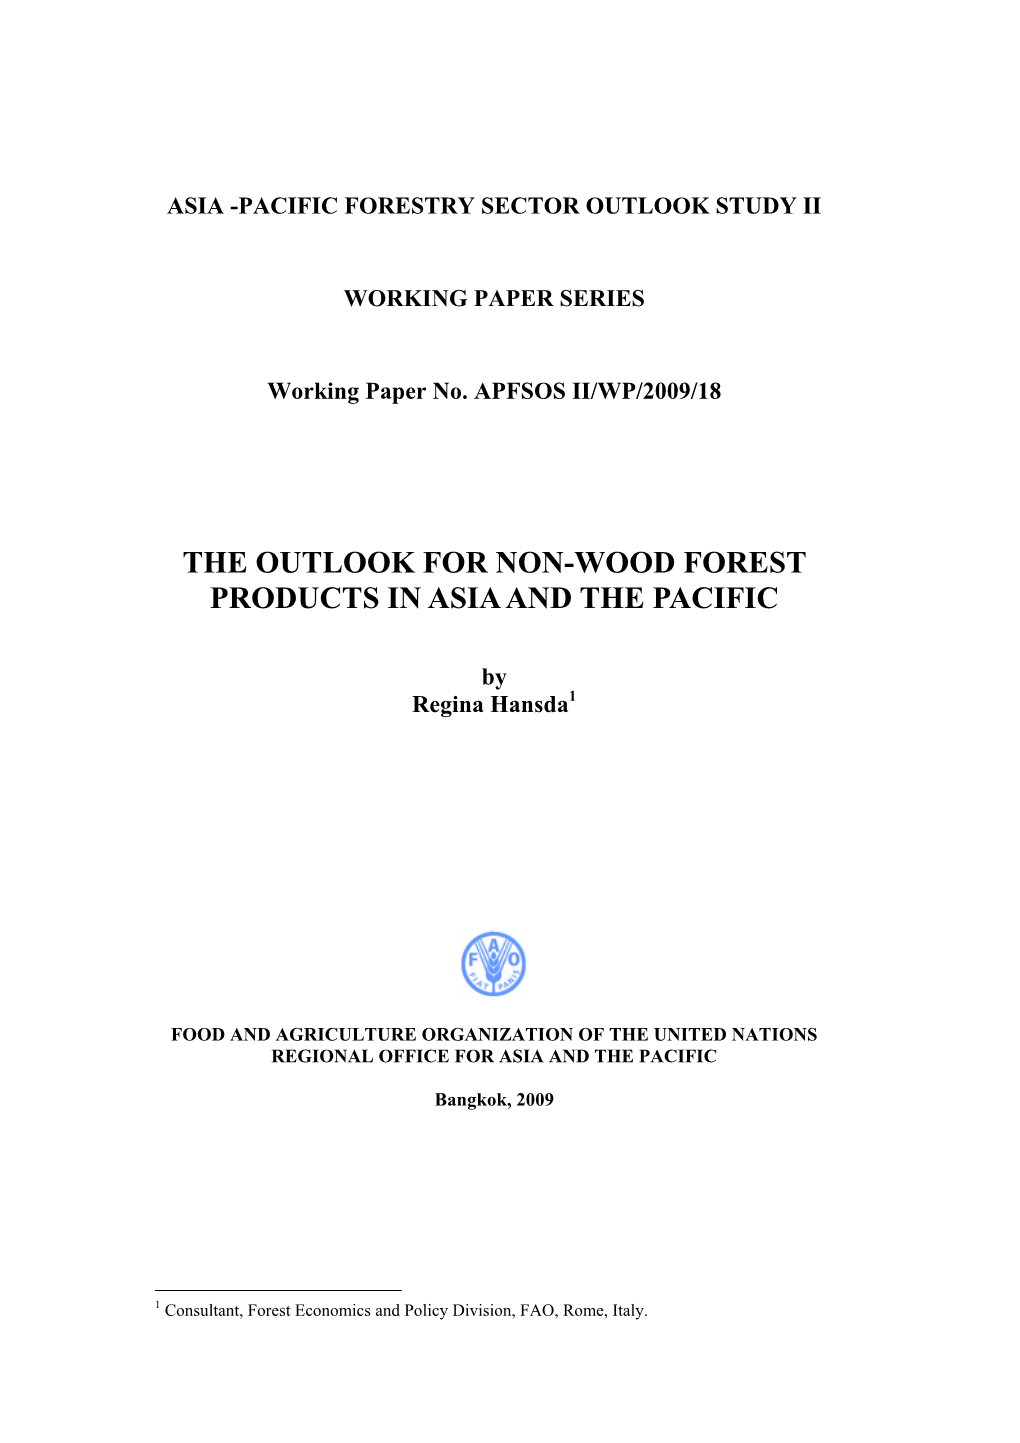 The Outlook for Non-Wood Forest Products in Asia and the Pacific